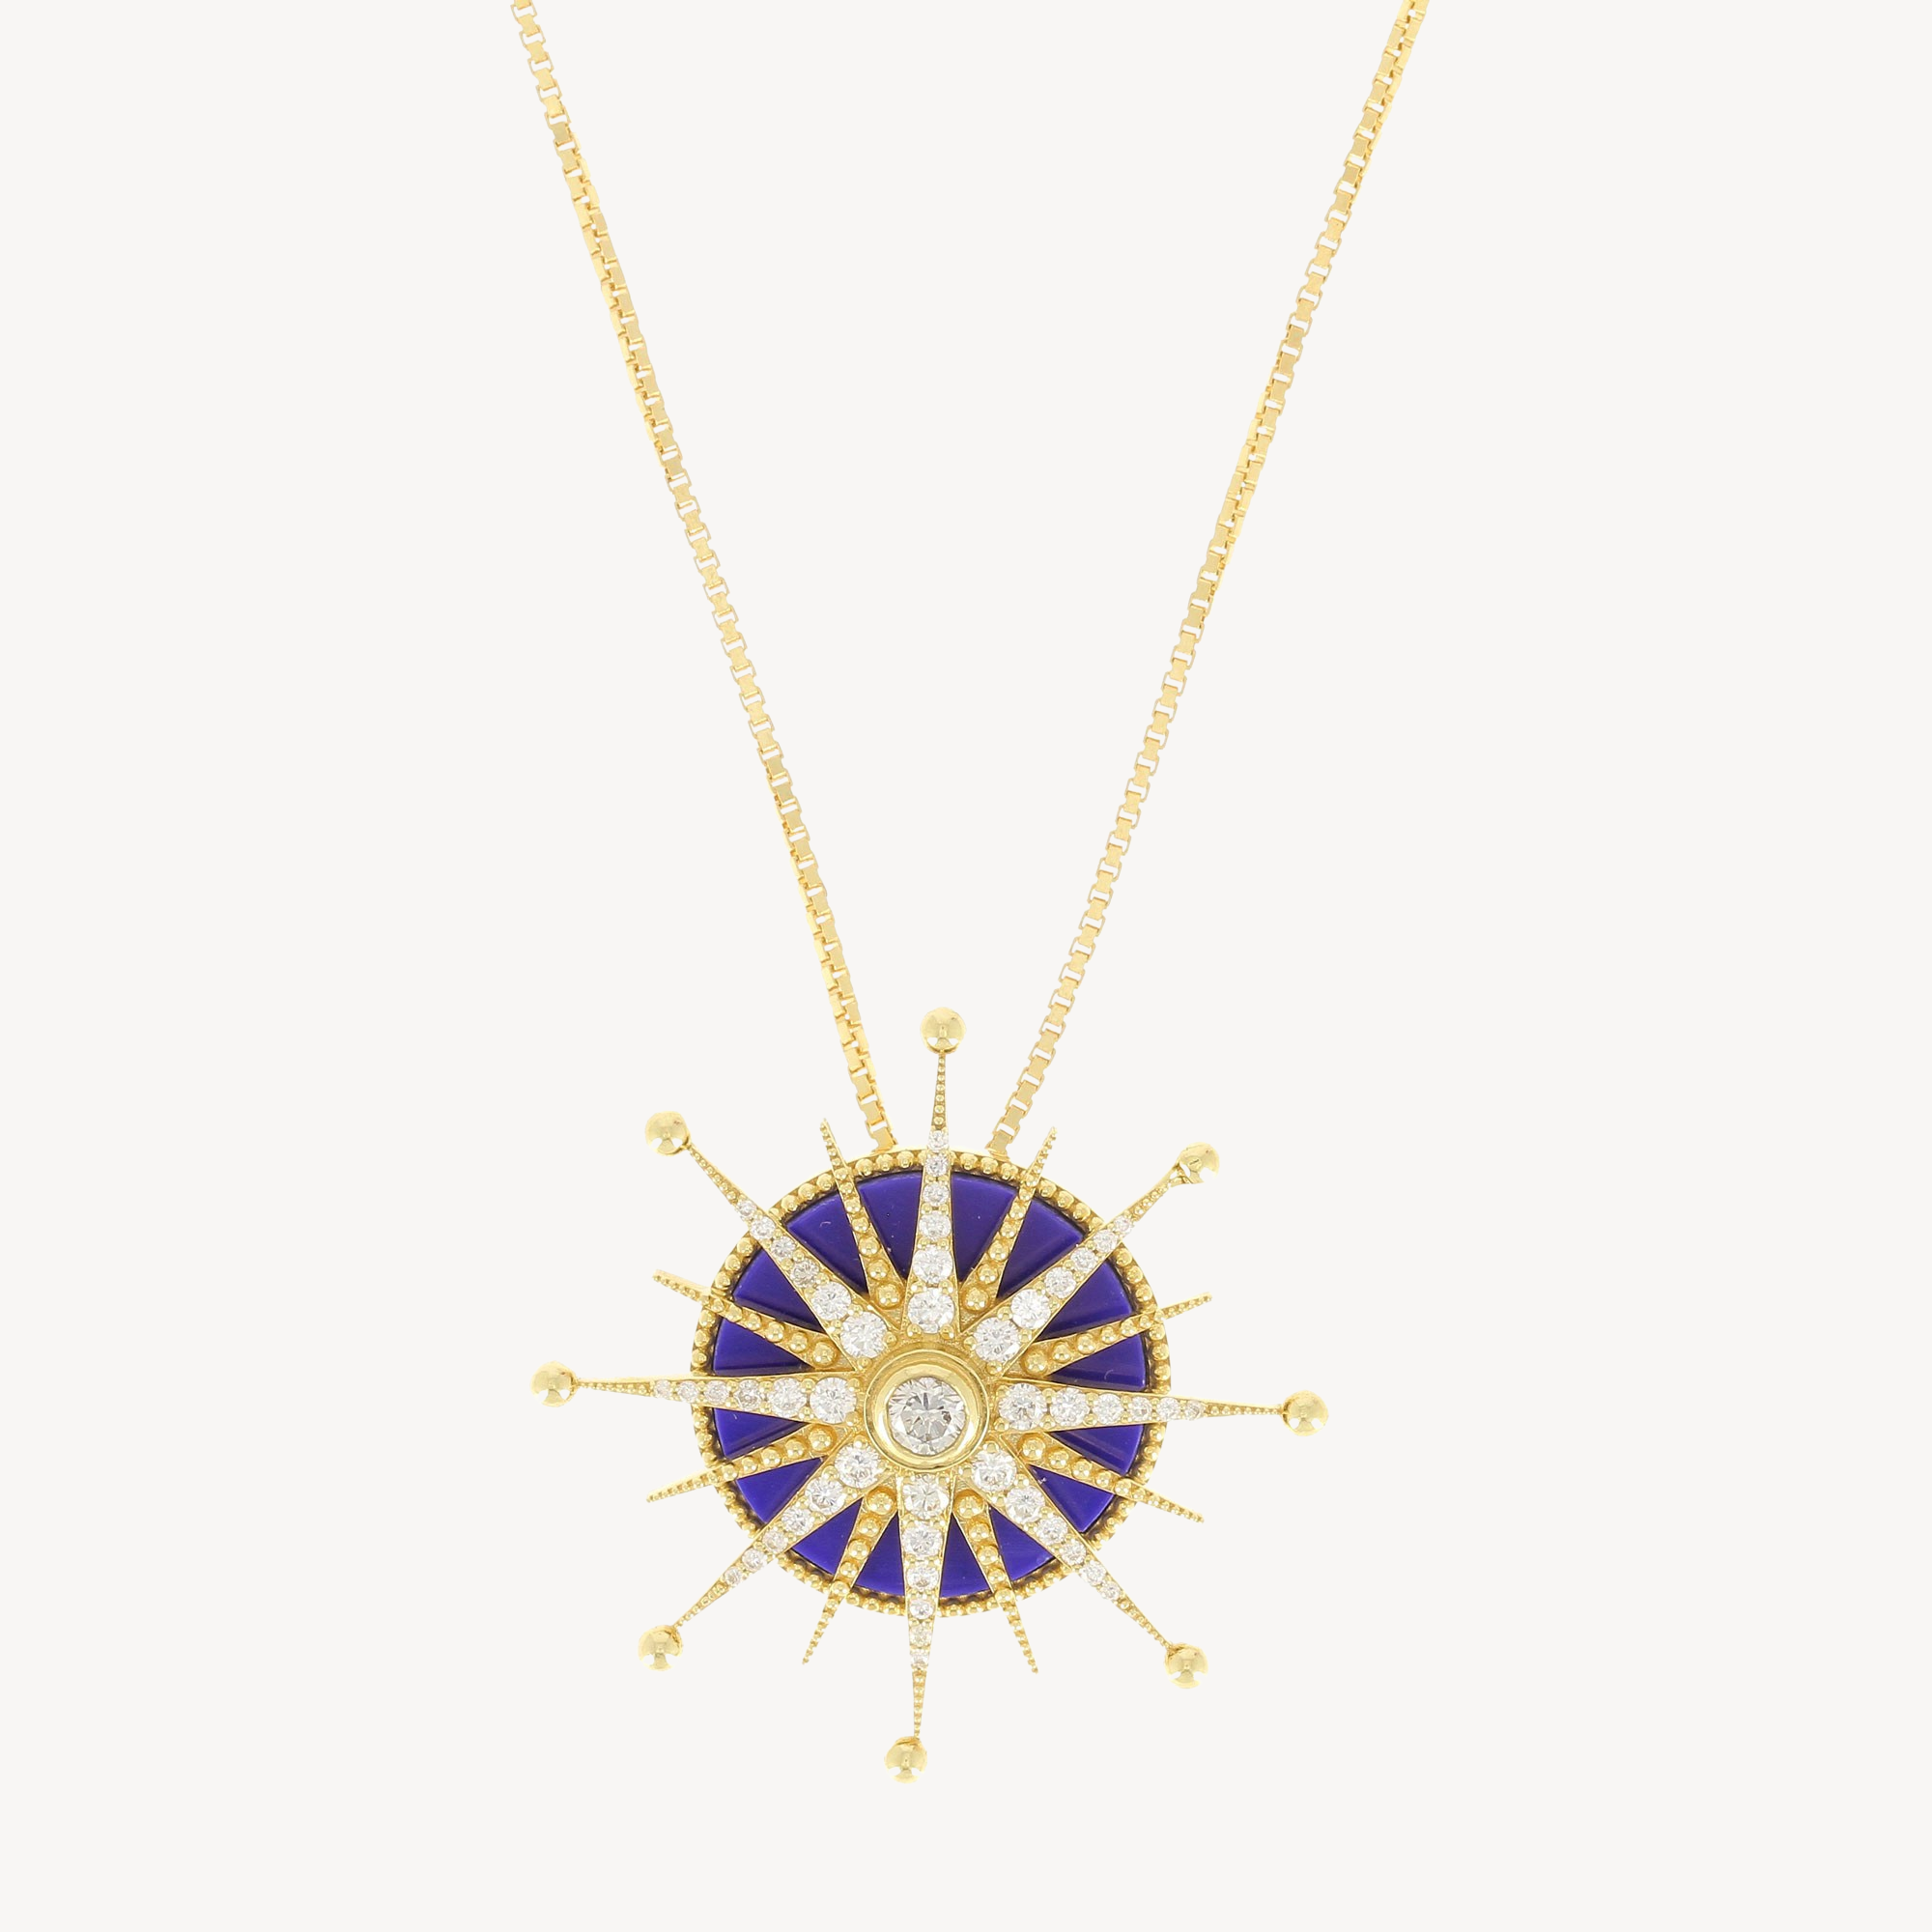 Wandering Star Necklace